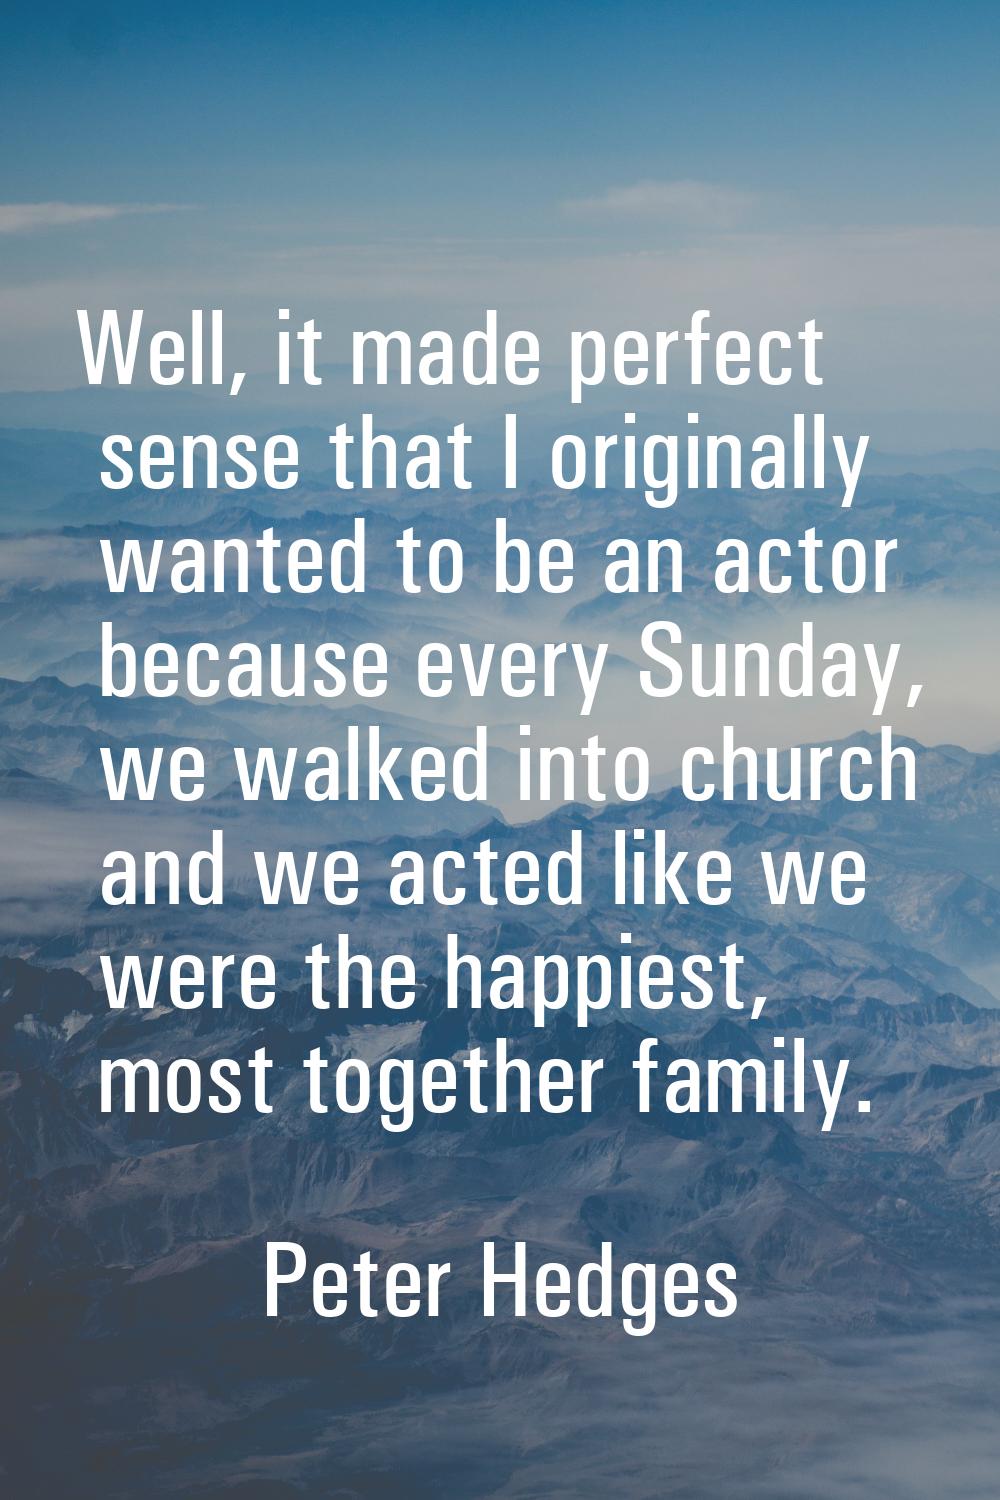 Well, it made perfect sense that I originally wanted to be an actor because every Sunday, we walked